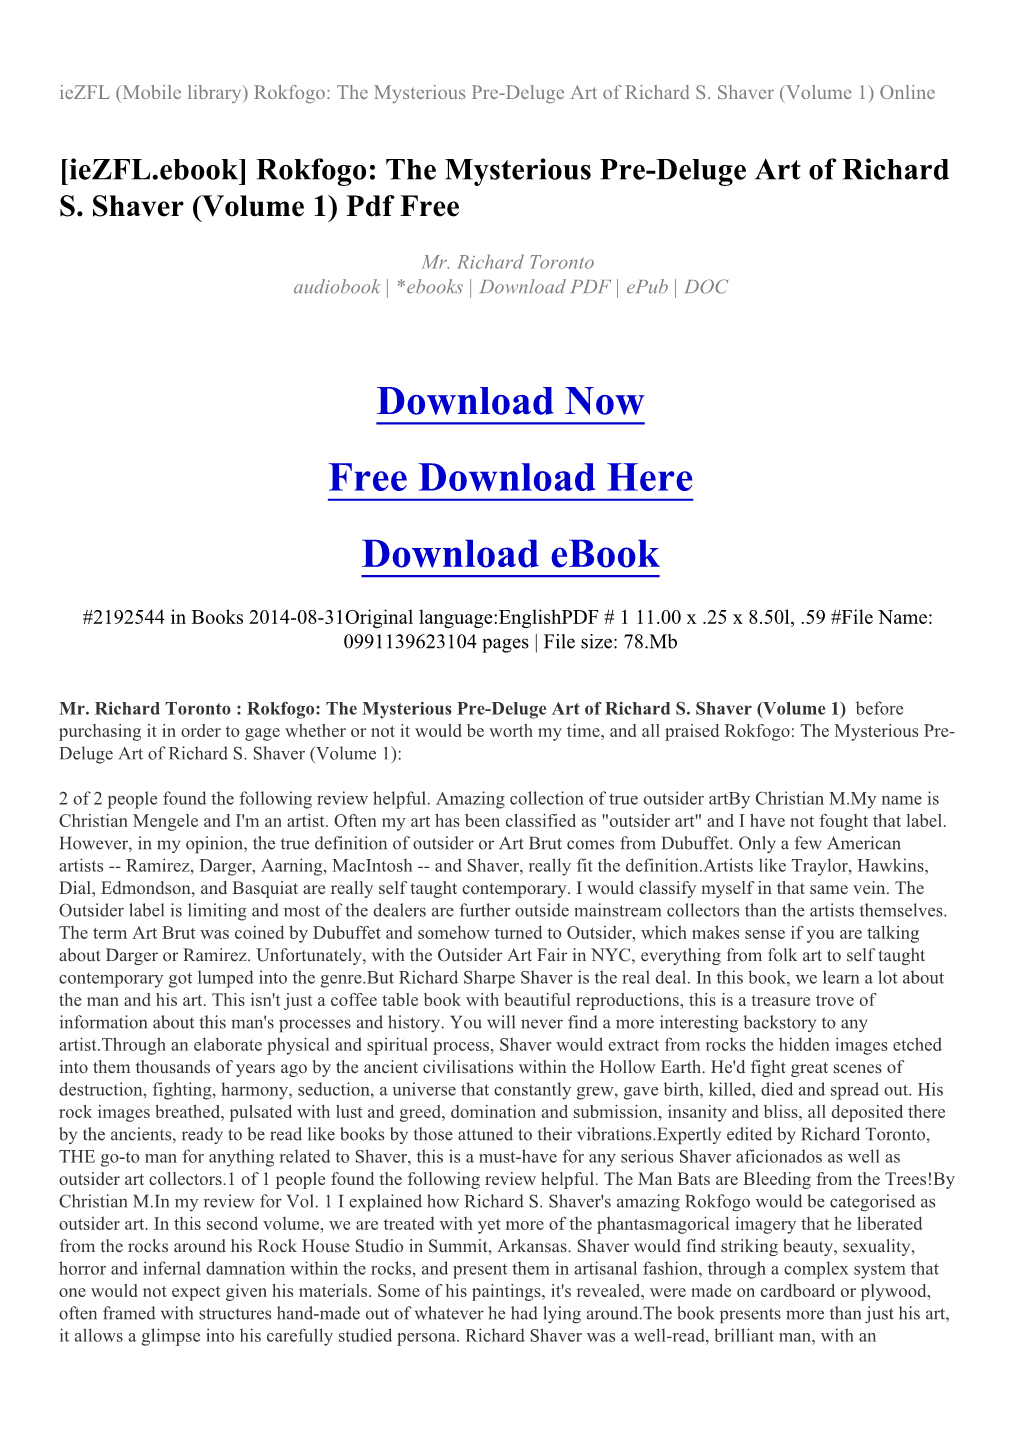 Rokfogo: the Mysterious Pre-Deluge Art of Richard S. Shaver (Volume 1) Online